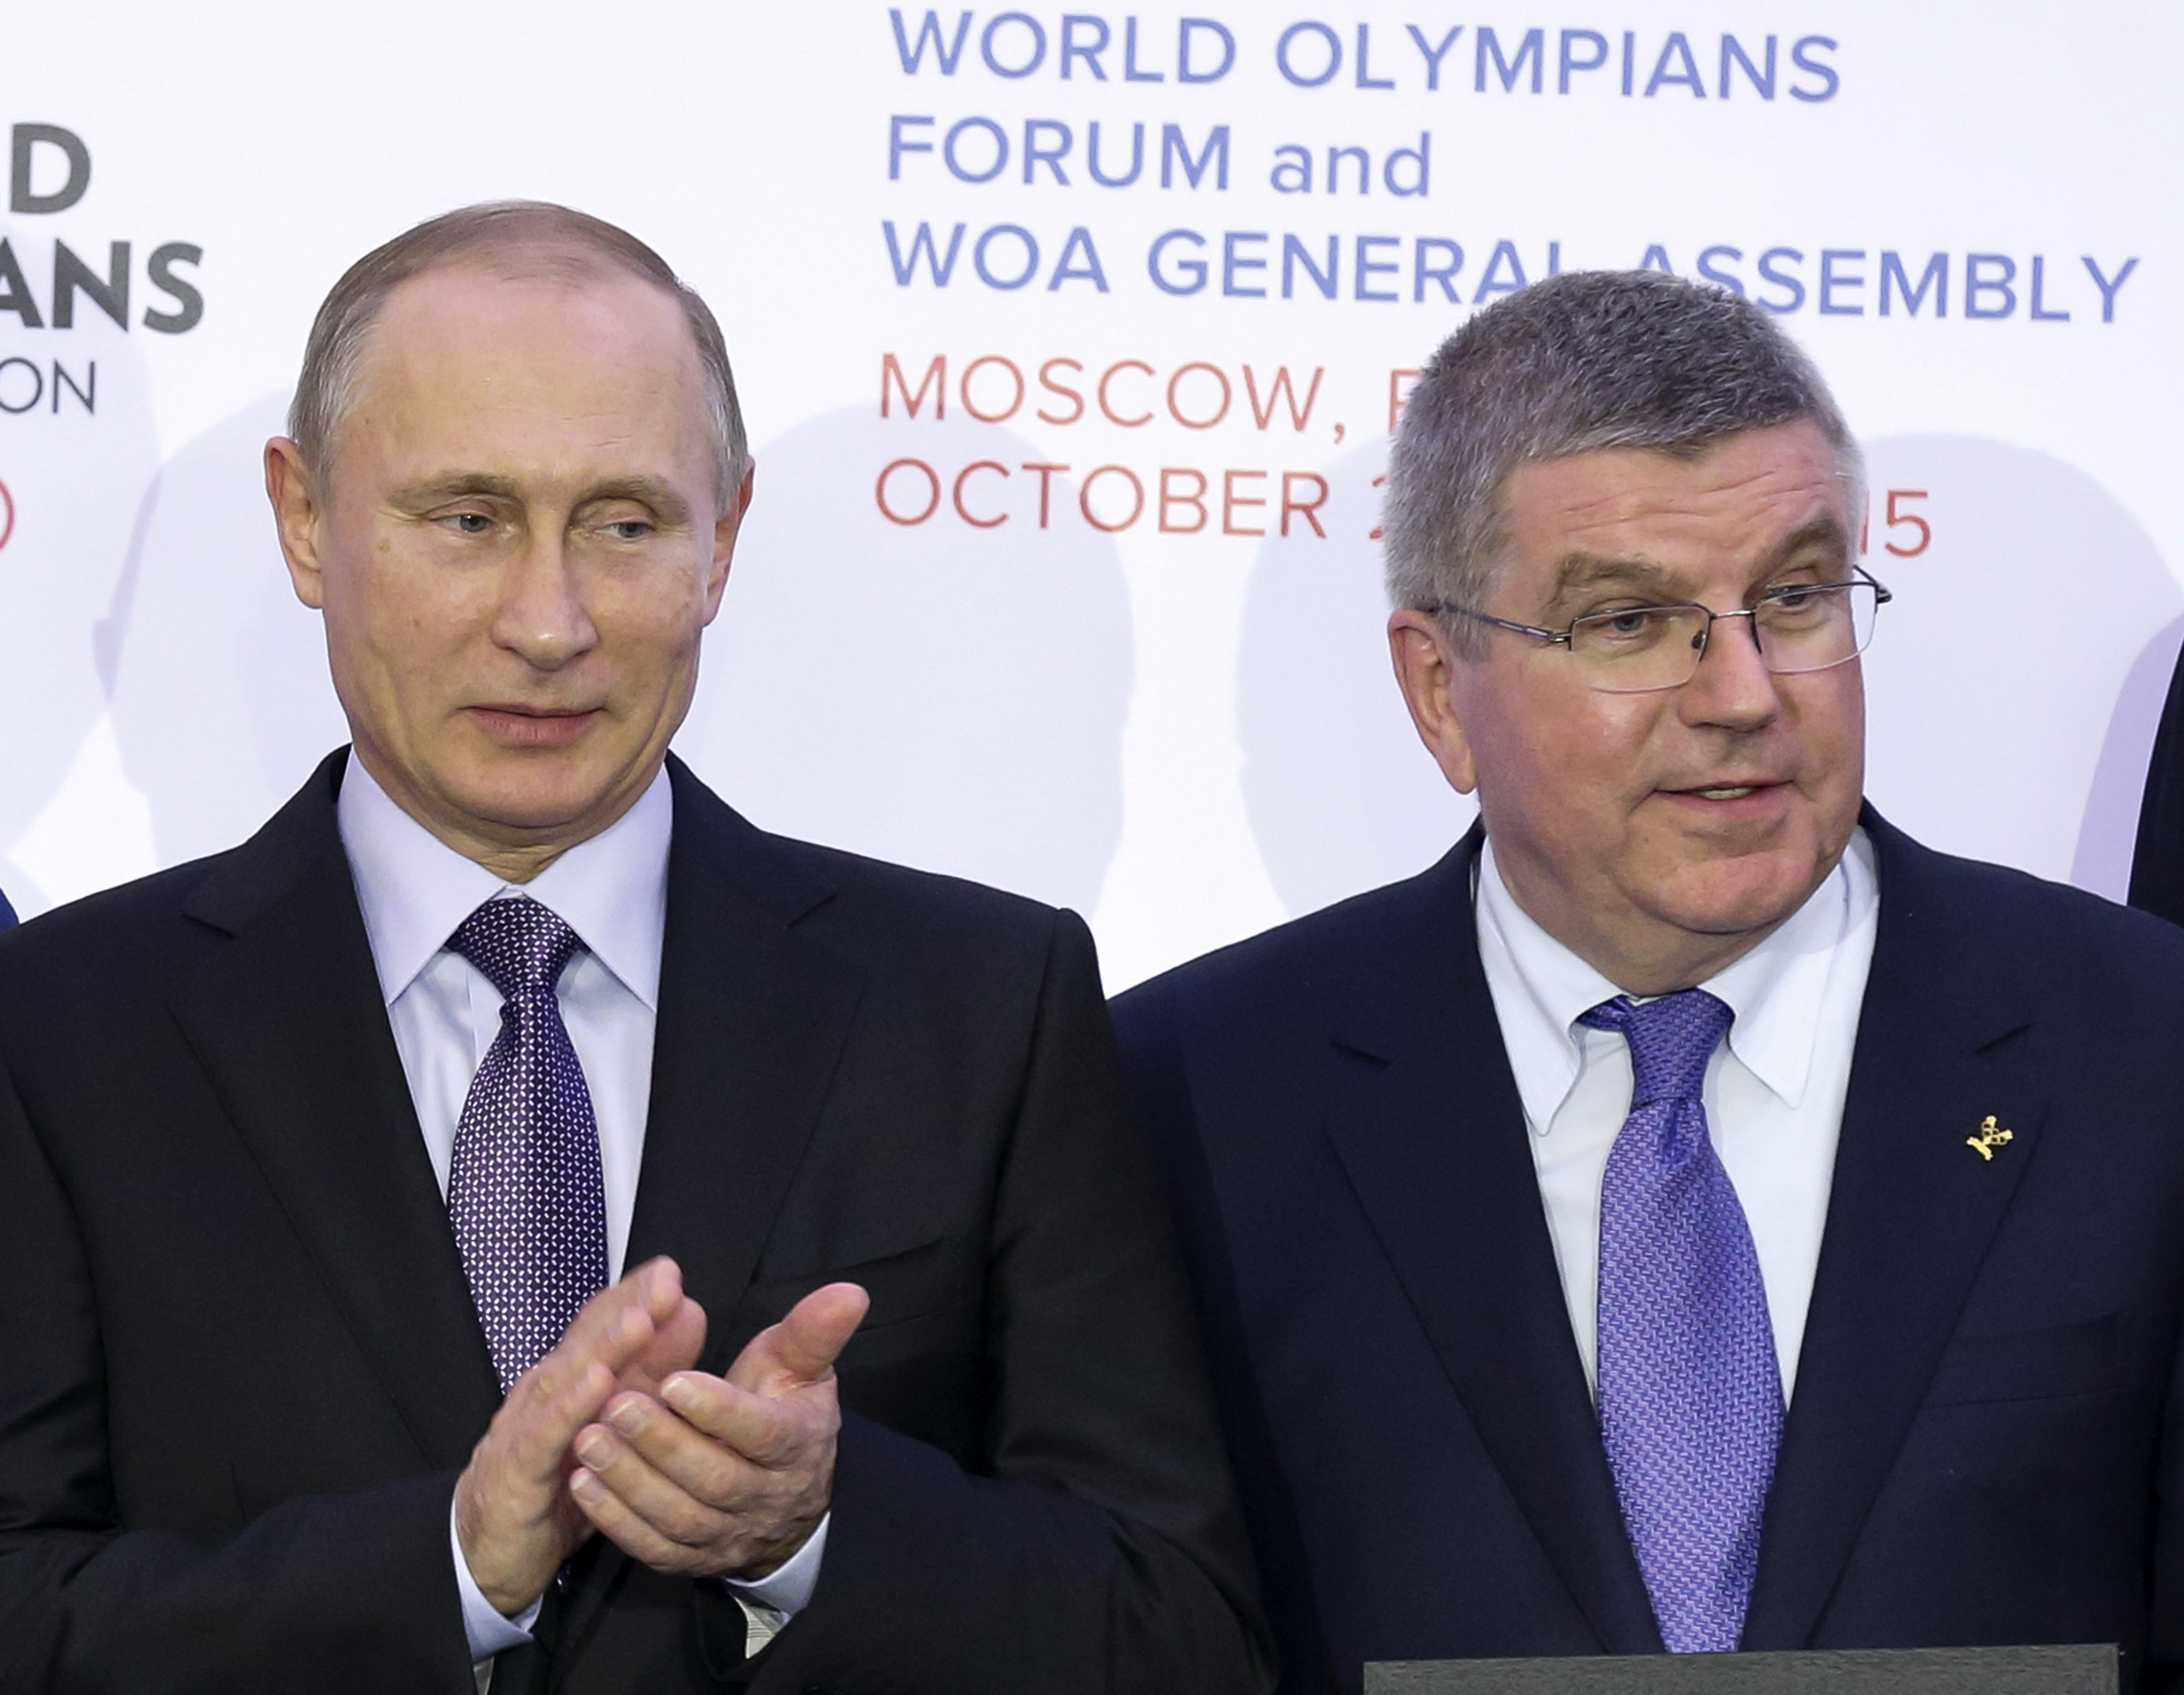 IOC president Thomas Bach believes Russia will have cleaned up its act in time to participate at the Olympics. Photo: AP